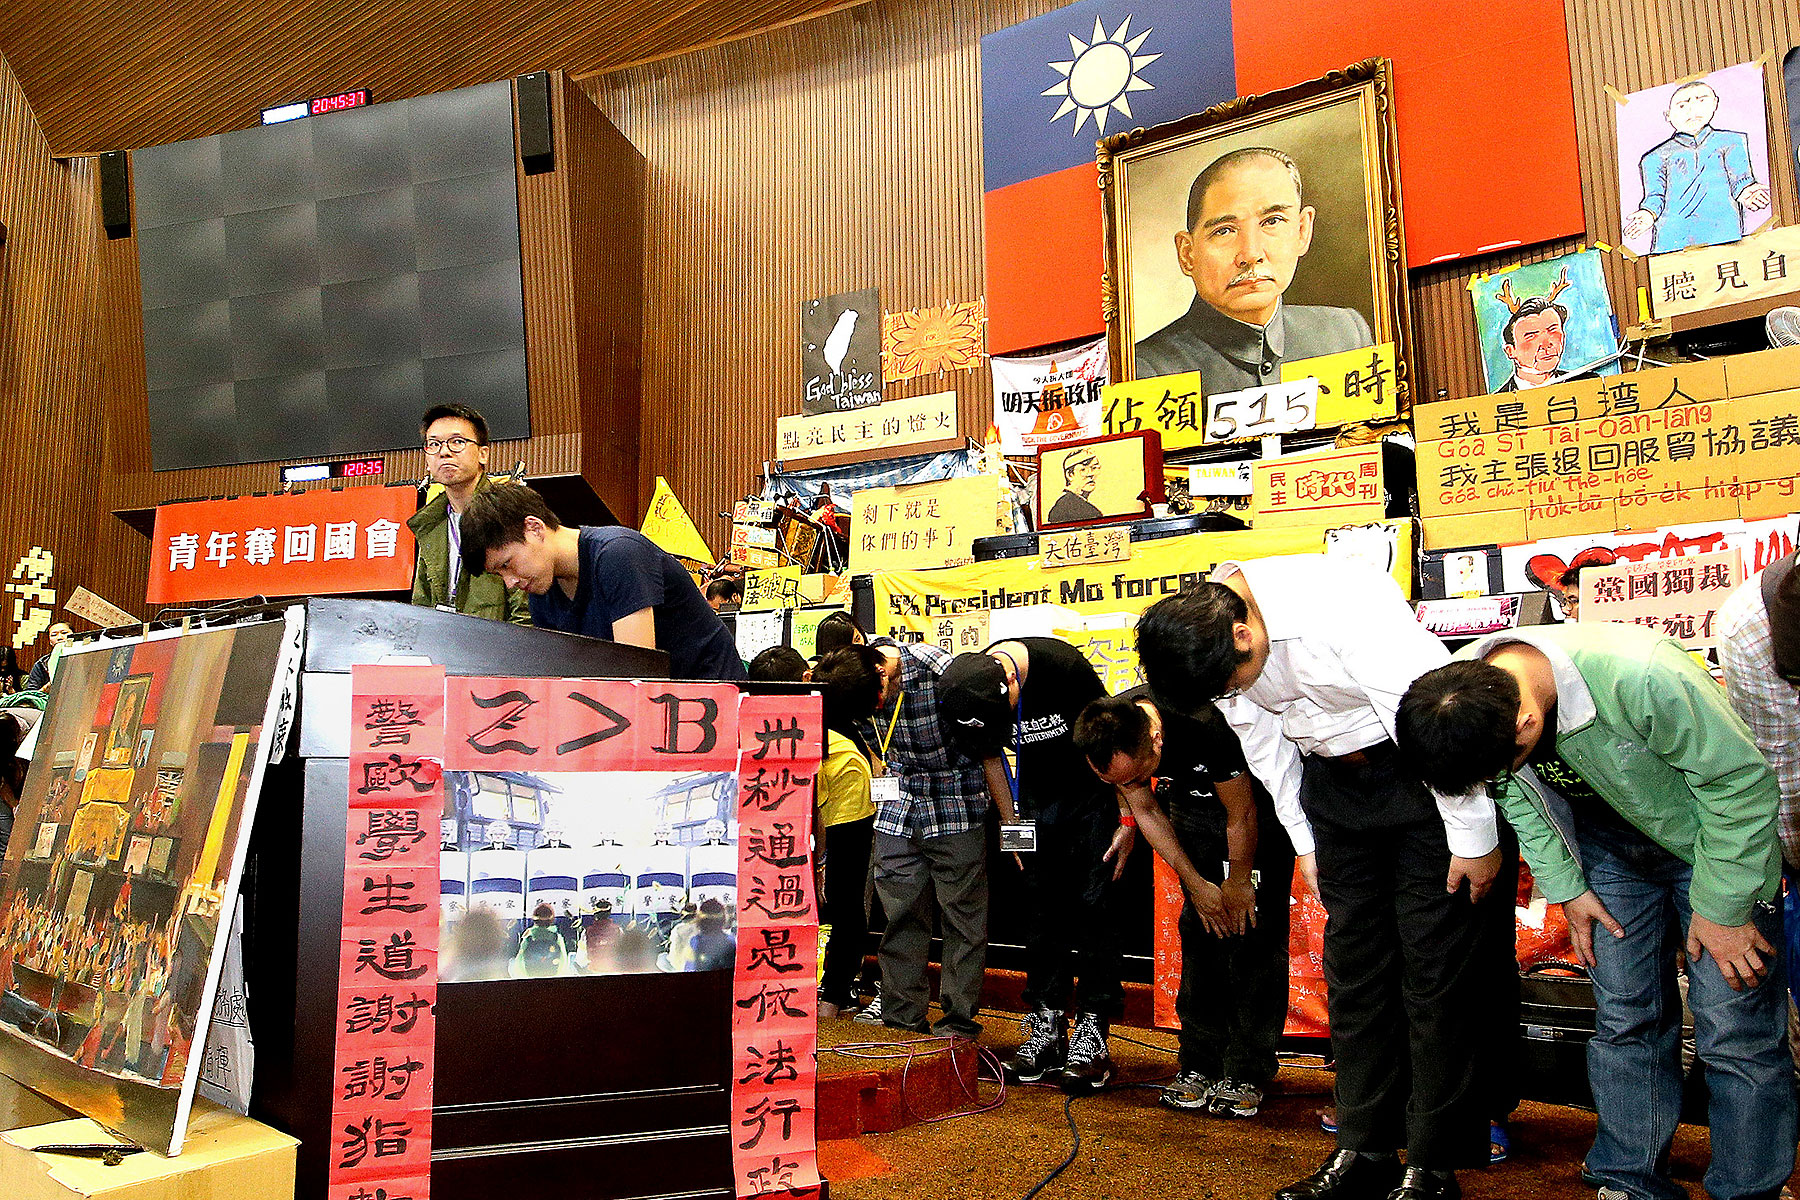 Student leaders bow to supporters during a news conference at Taiwan's legislative Yuan, the island's parliament, in Taipei on April 7, 2014 (Reuters)